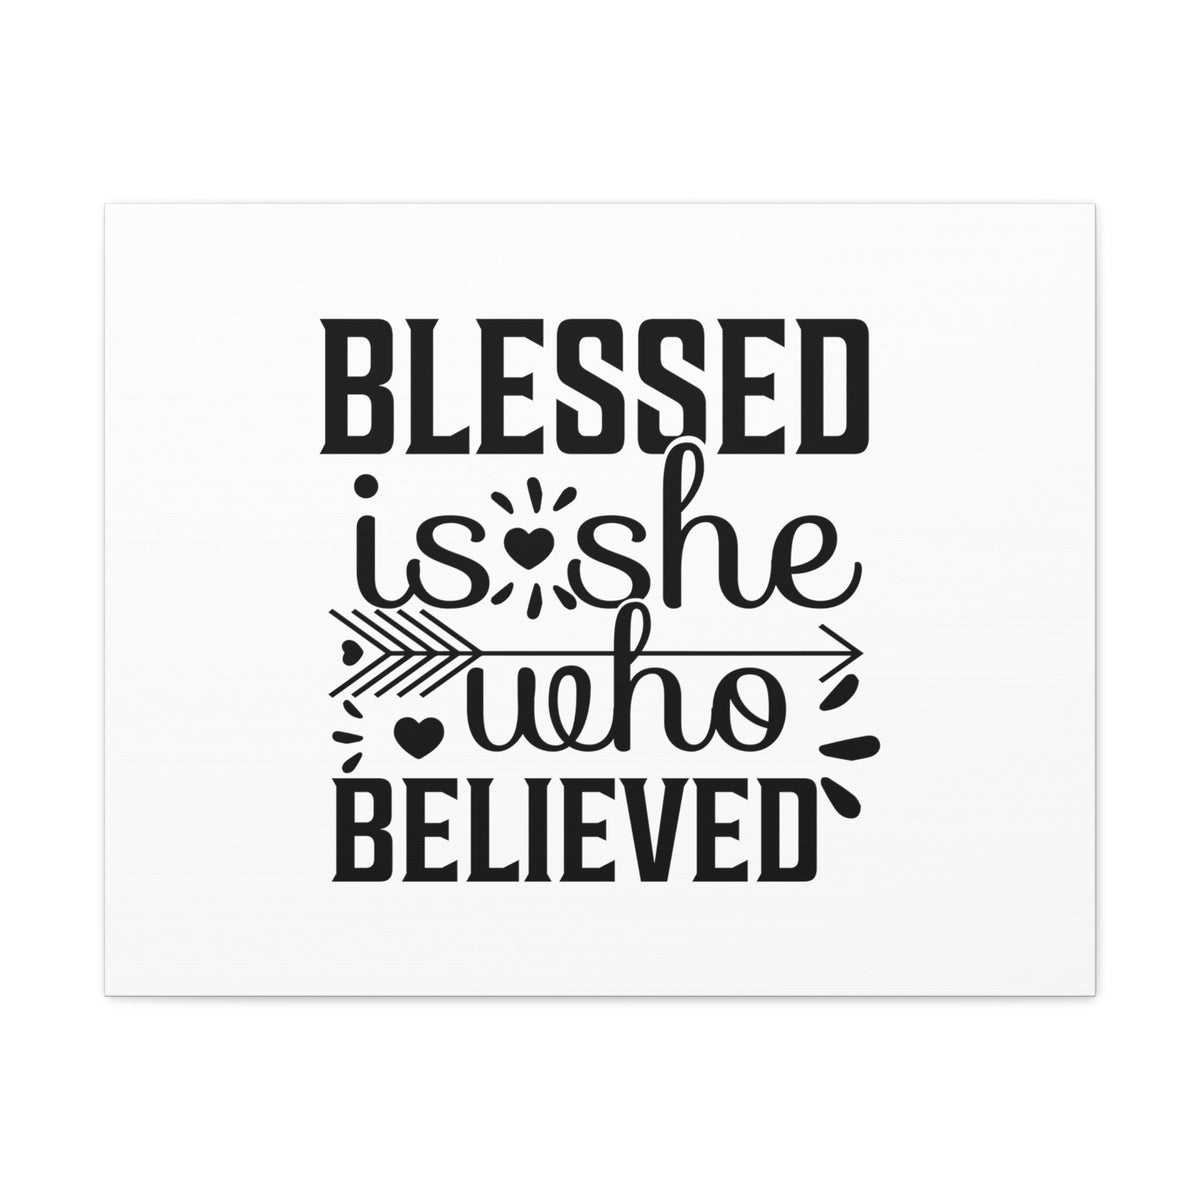 Scripture Walls Blessed Is She Who Believed John 20:29 Christian Wall Art Bible Verse Print Ready to Hang Unframed-Express Your Love Gifts